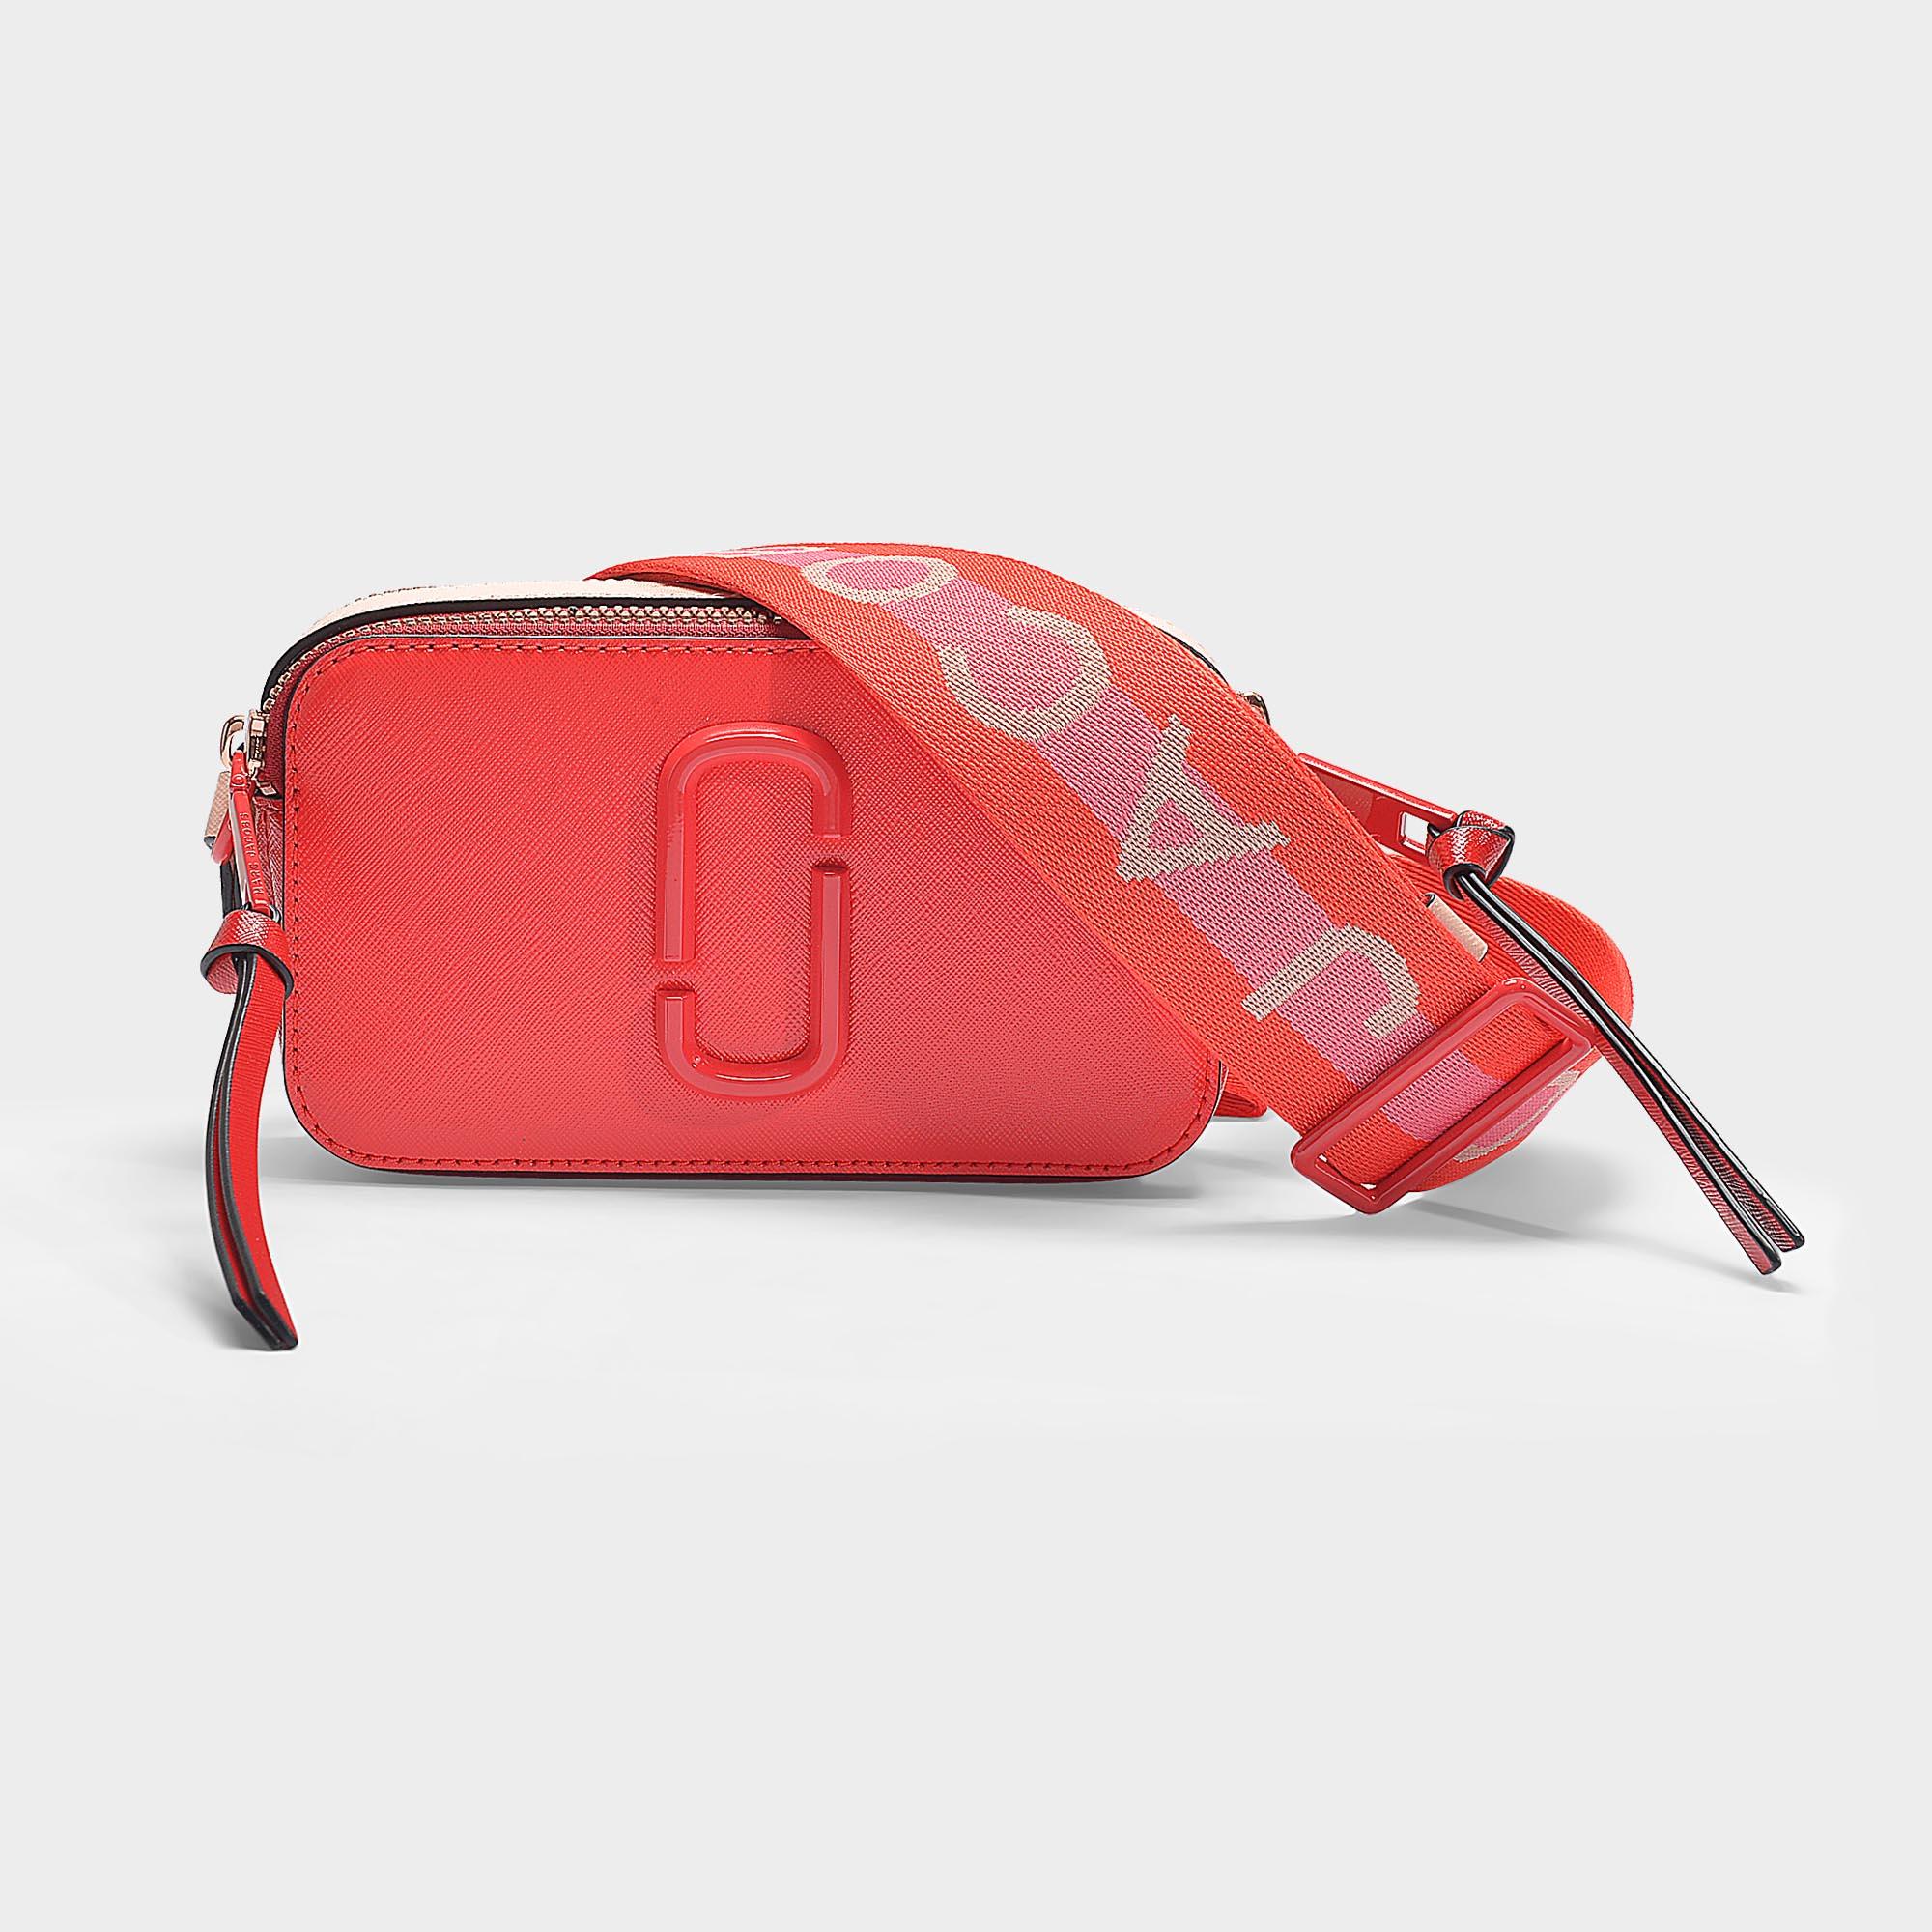 Marc Jacobs Snapshot Bag In Poppy Red Leather With Polyurethane